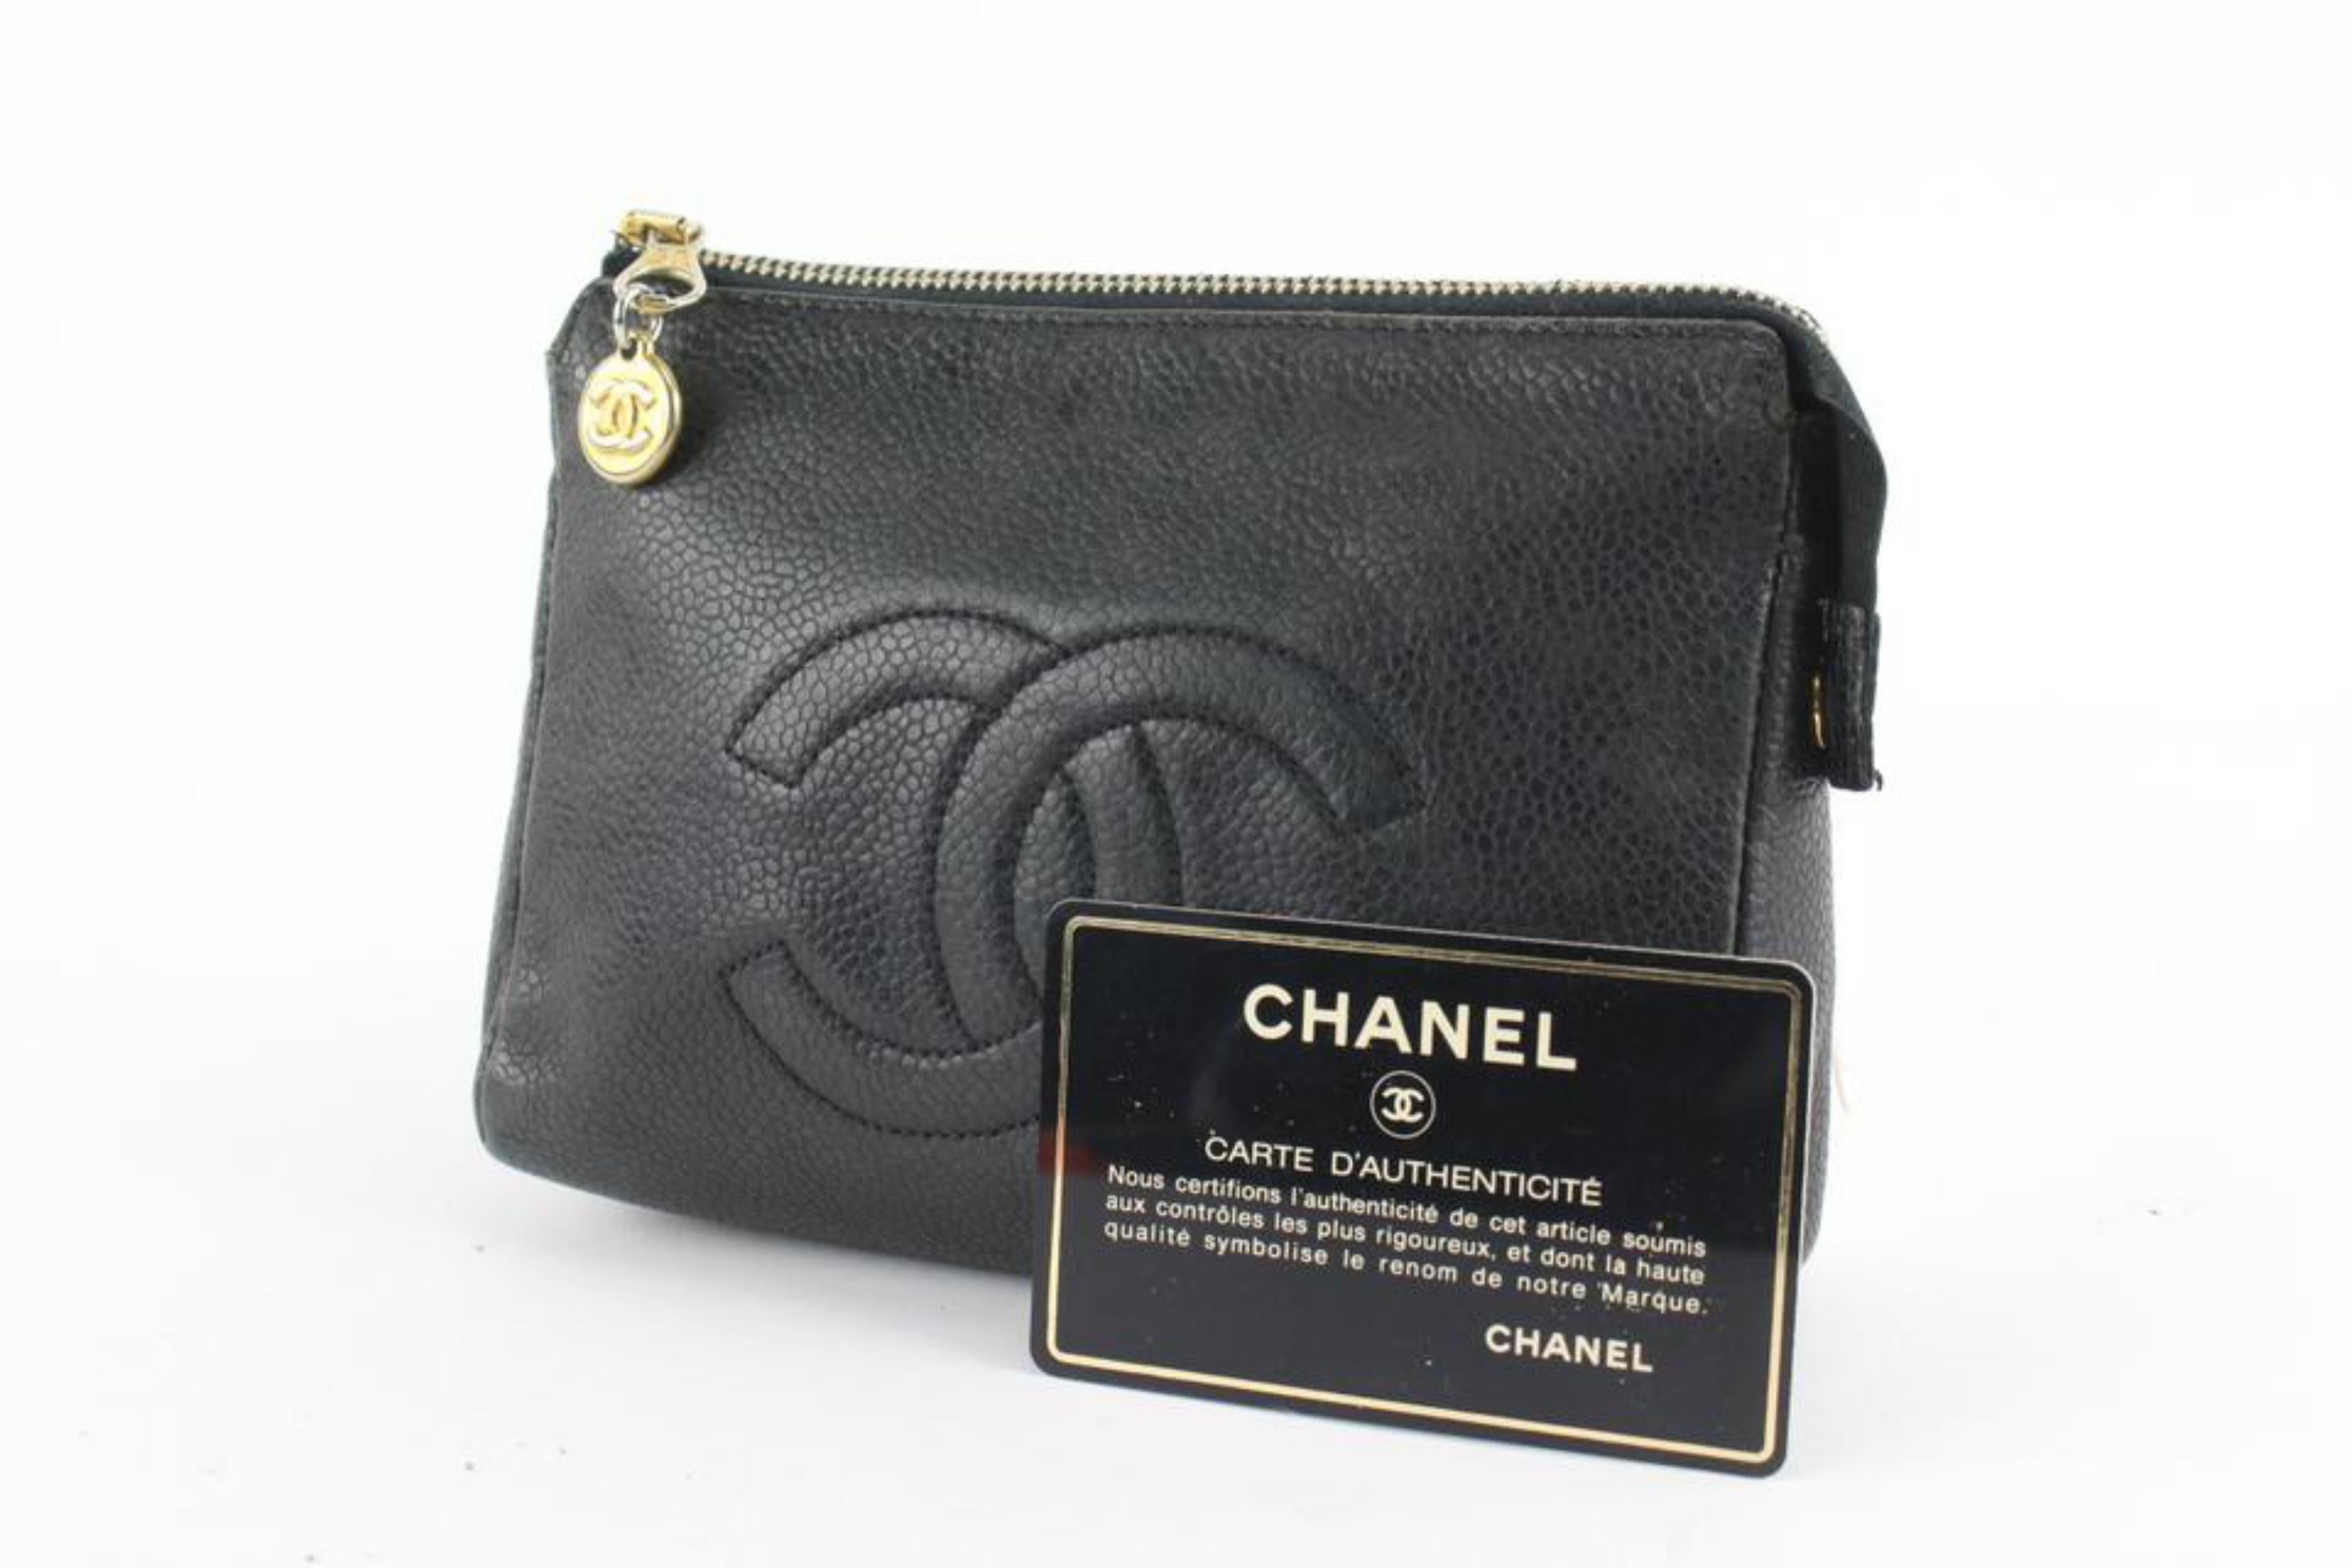 Chanel Black Caviar CC Logo Cosmetic Pouch Toiletry Case Zip Case 1223c10
Date Code/Serial Number: 4941427
Made In: Italy
Measurements: Length:  6